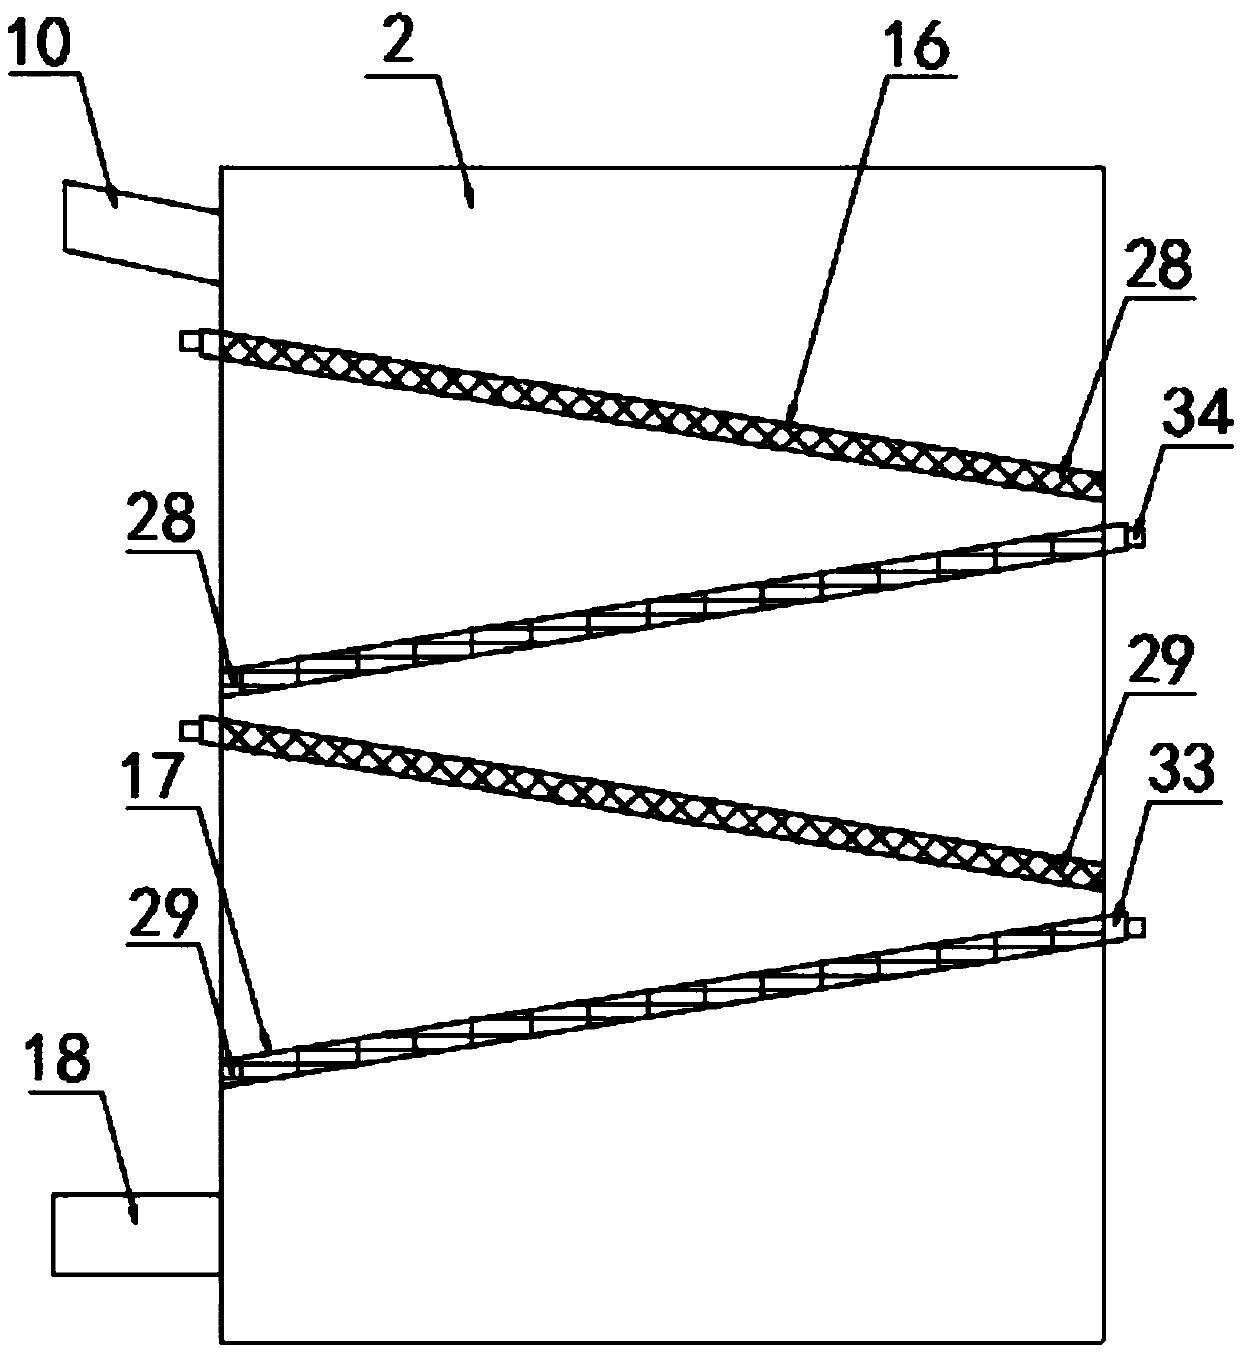 Circulating water self-cleaning structure and process of washing tower